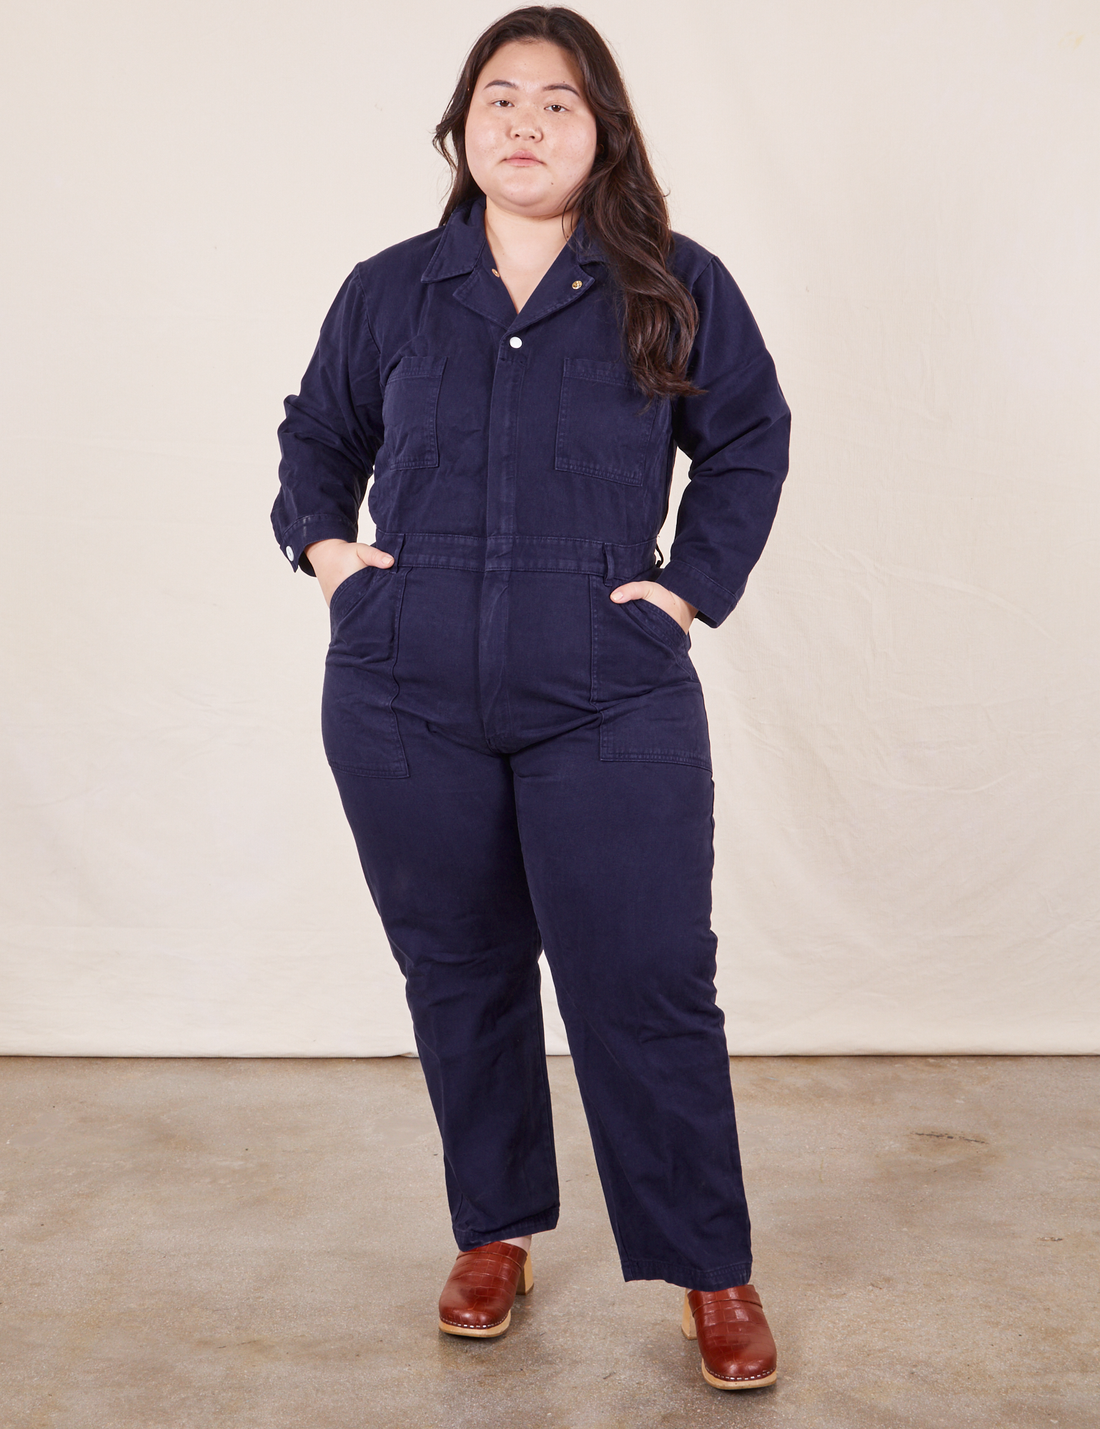 Ashley is 5'7" and wearing 1XL Everyday Jumpsuit in Navy Blue